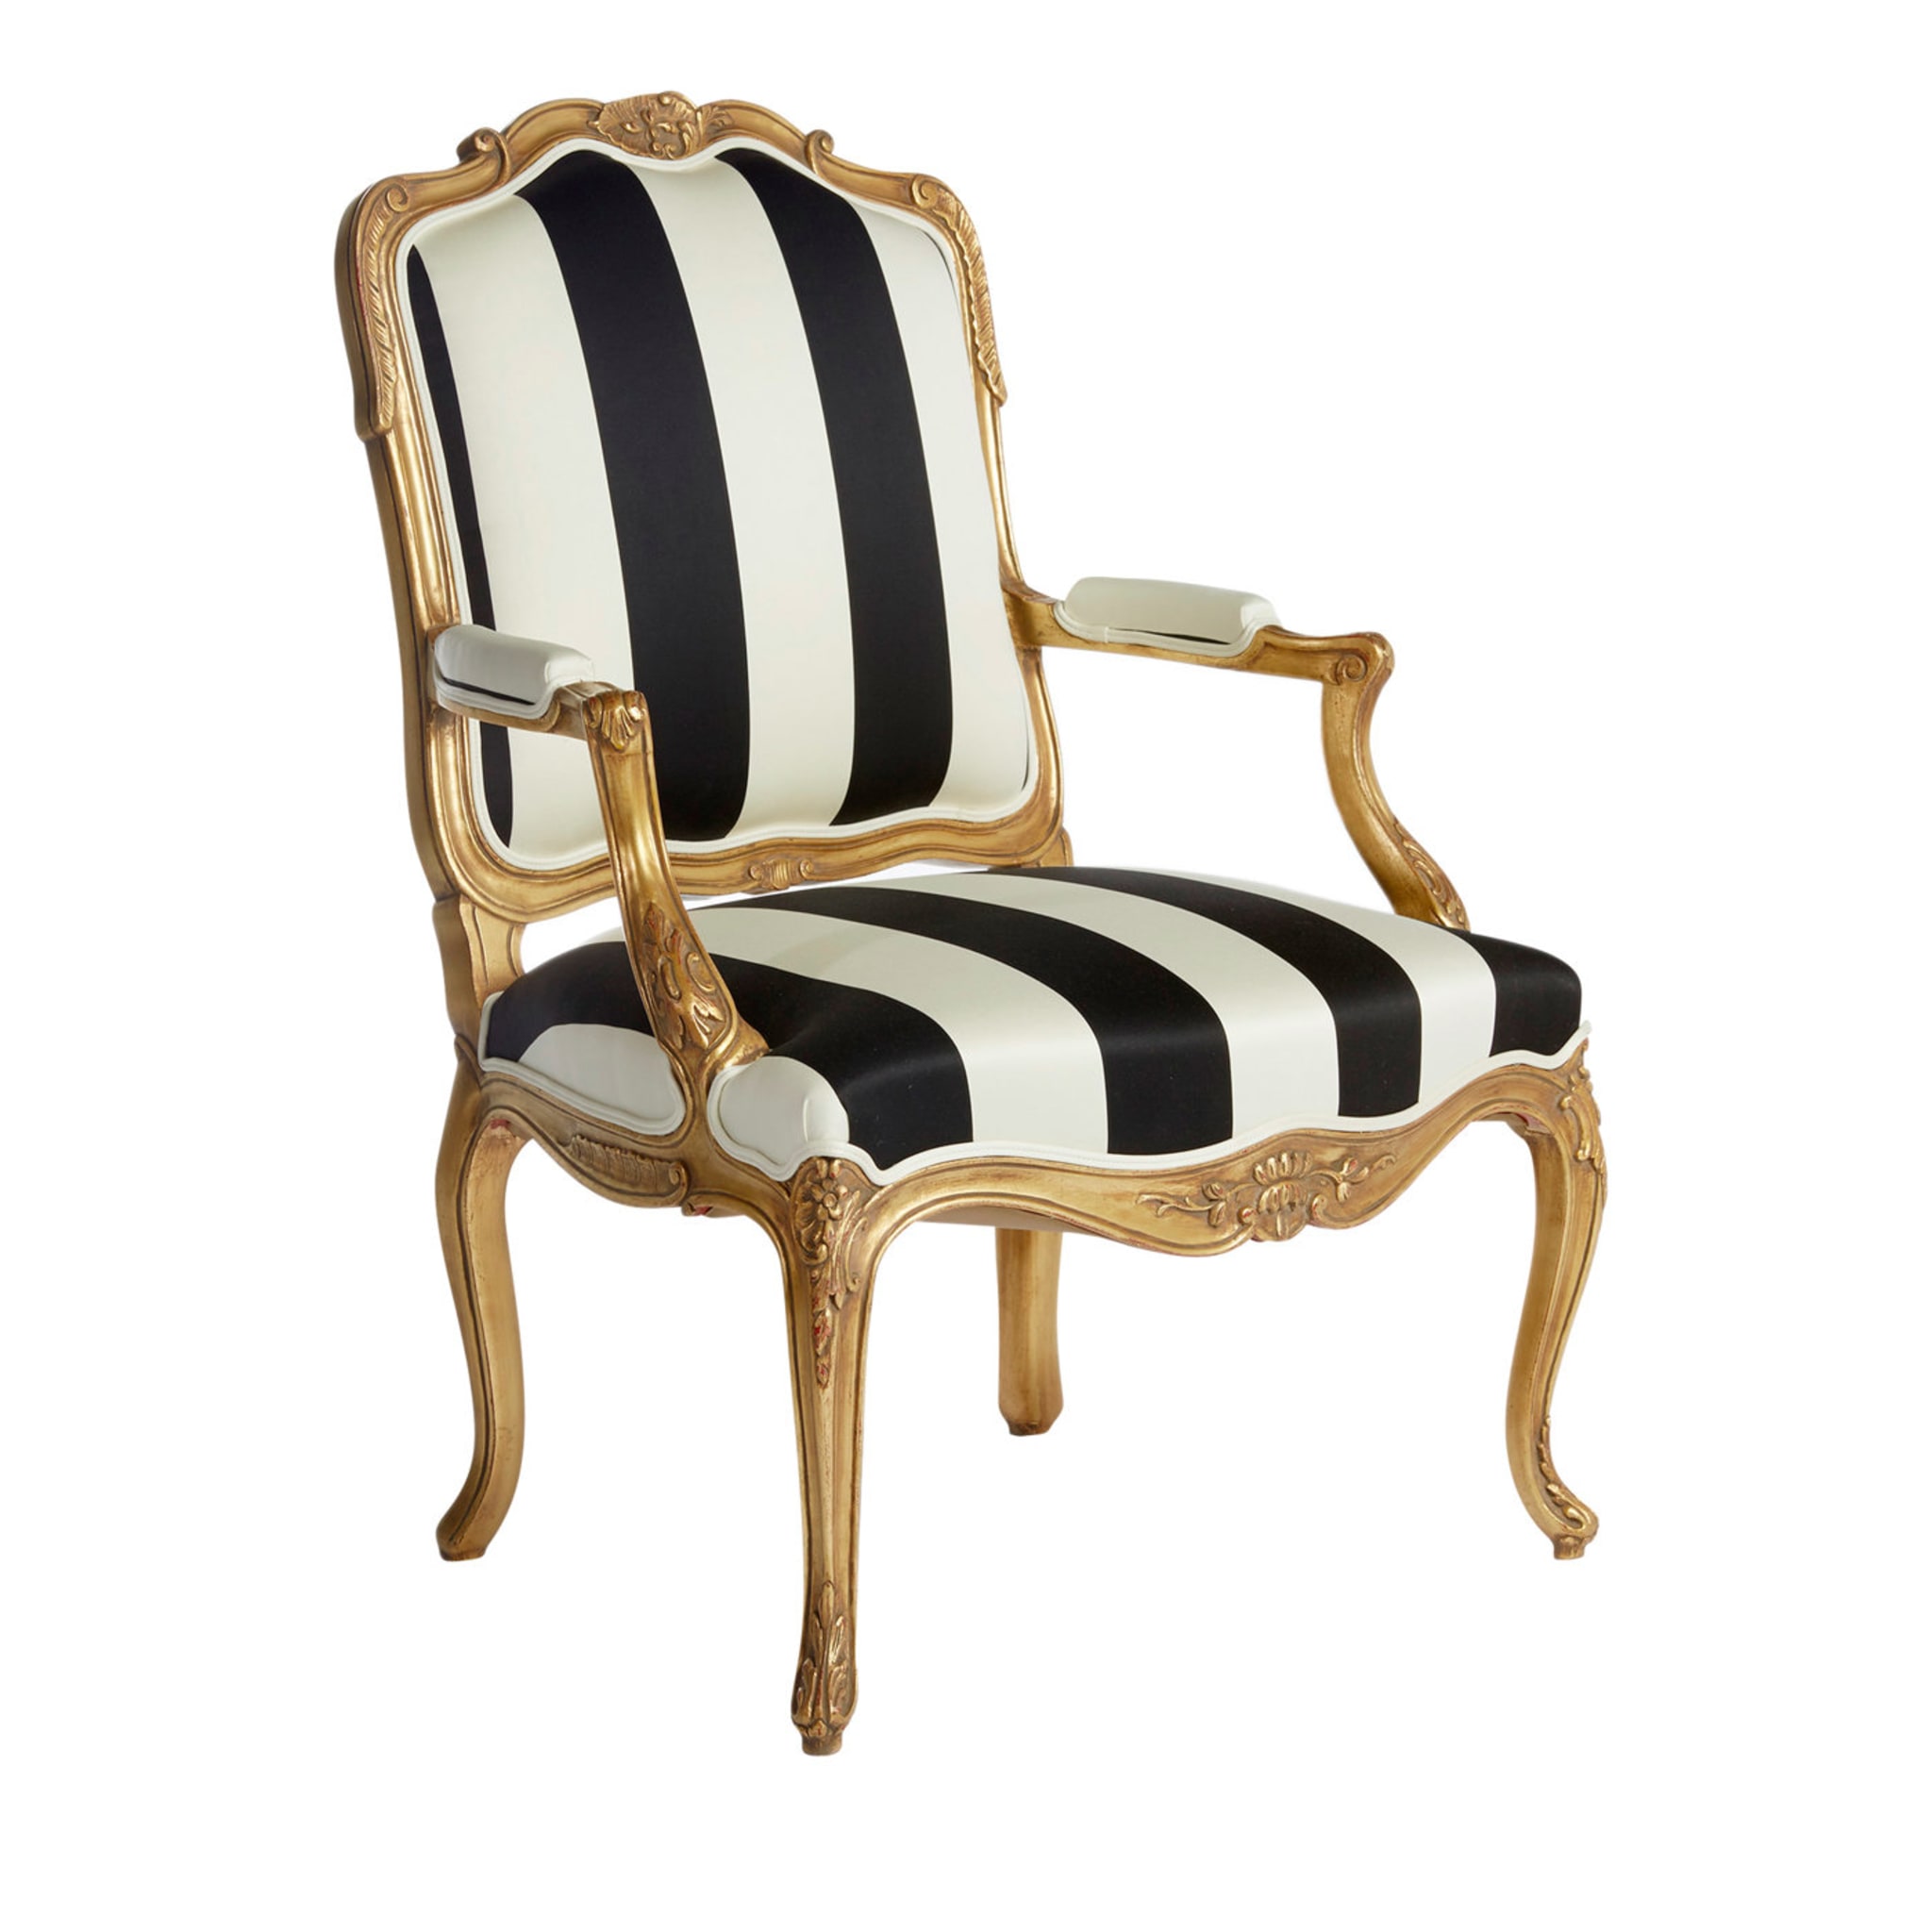 Black and White Chair With Armrests Louis XV Salda